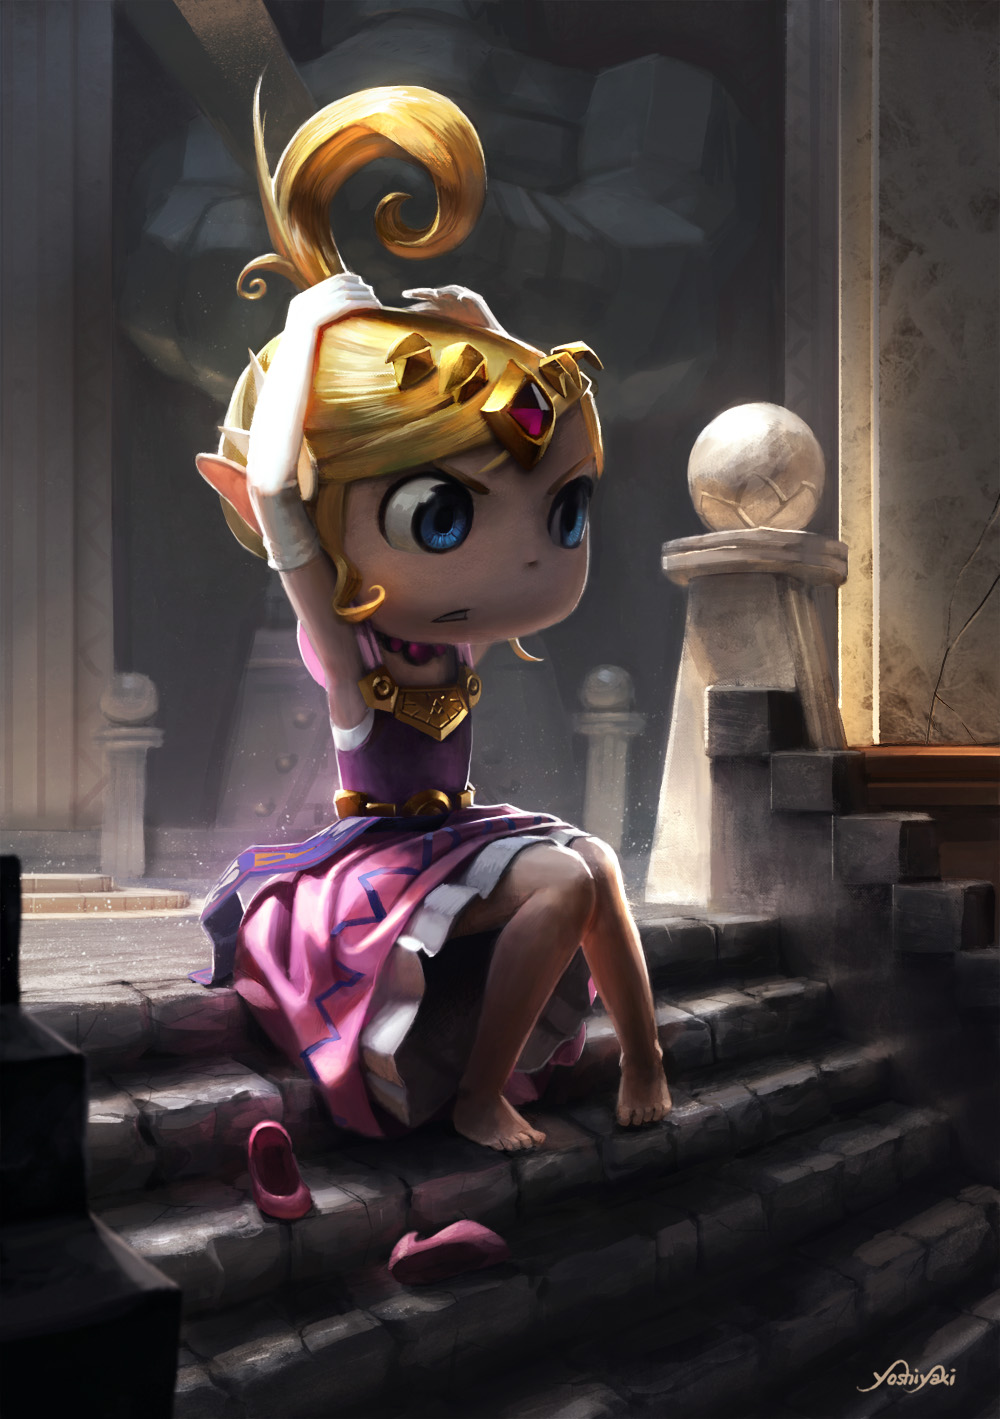 1girl adjusting_hair barefoot blonde_hair blue_eyes cassio_yoshiyaki dress elbow_gloves forehead_jewel gloves high_ponytail highres long_hair pigeon-toed pink_dress pointy_ears princess_zelda shoes_removed solo stairs the_legend_of_zelda the_legend_of_zelda:_the_wind_waker tiara toes white_gloves